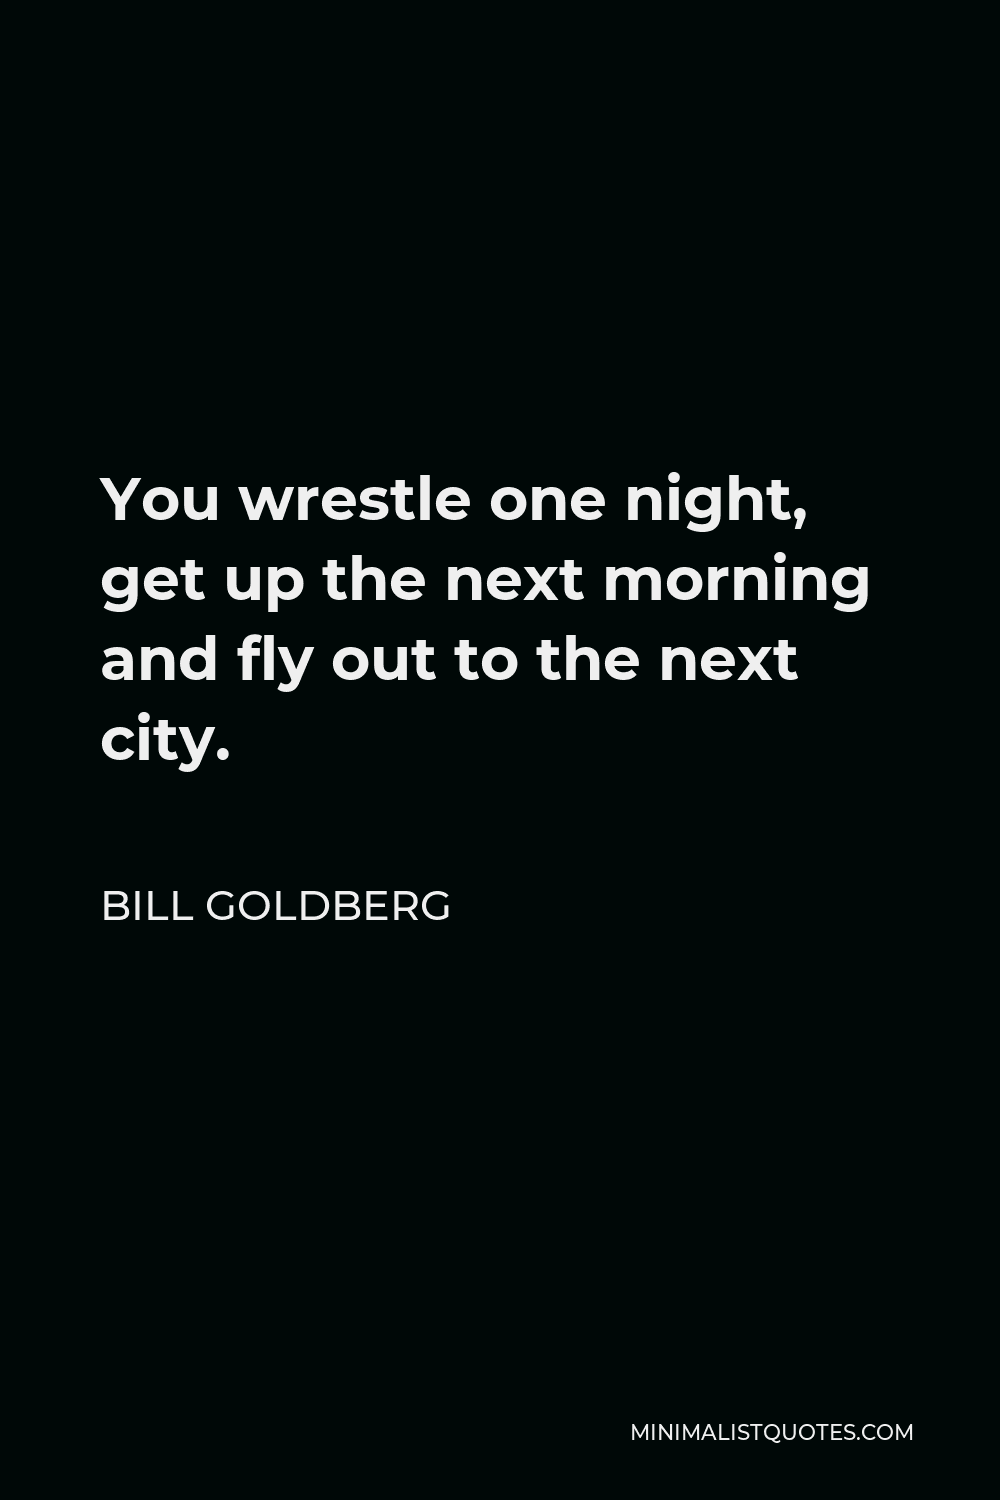 Bill Goldberg Quote - You wrestle one night, get up the next morning and fly out to the next city.